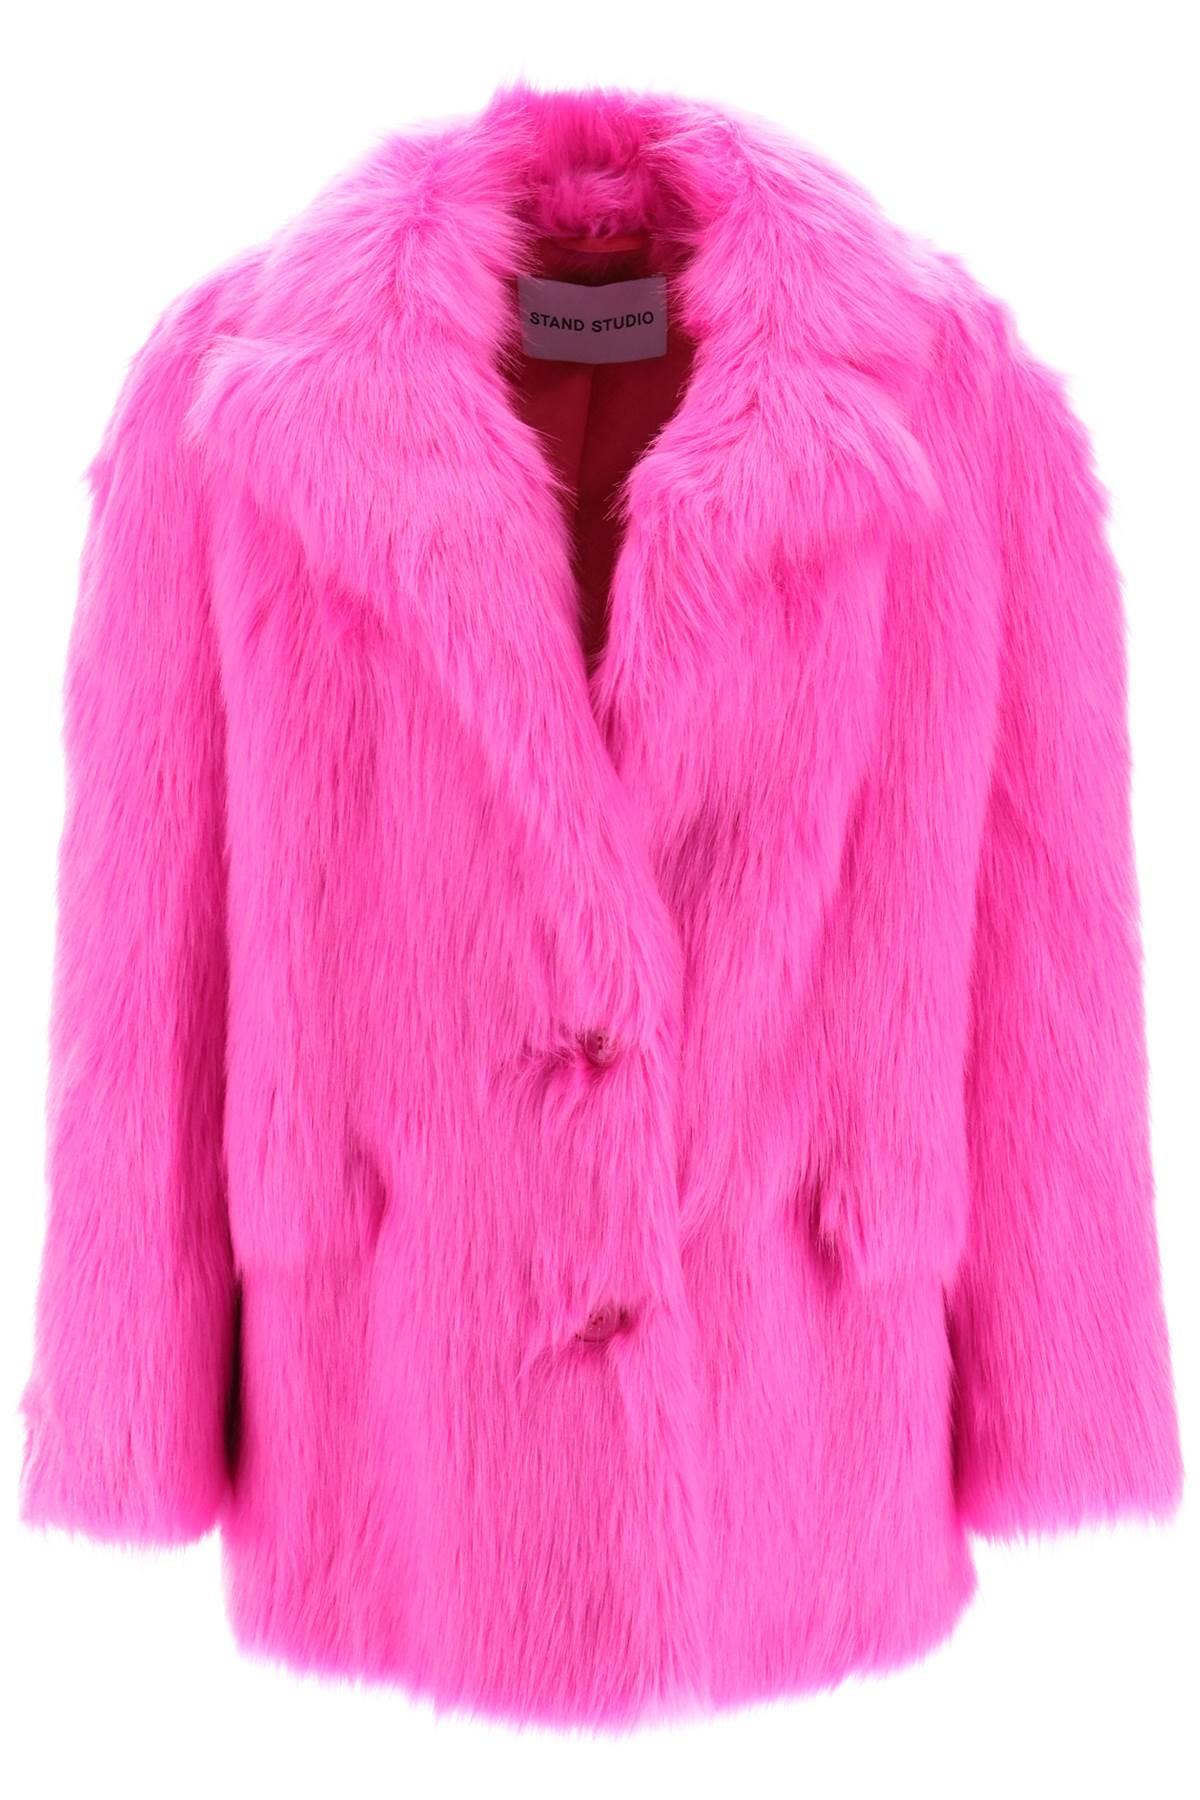 Stand Studio 'carter' Faux Fur Jacket in Pink | Lyst